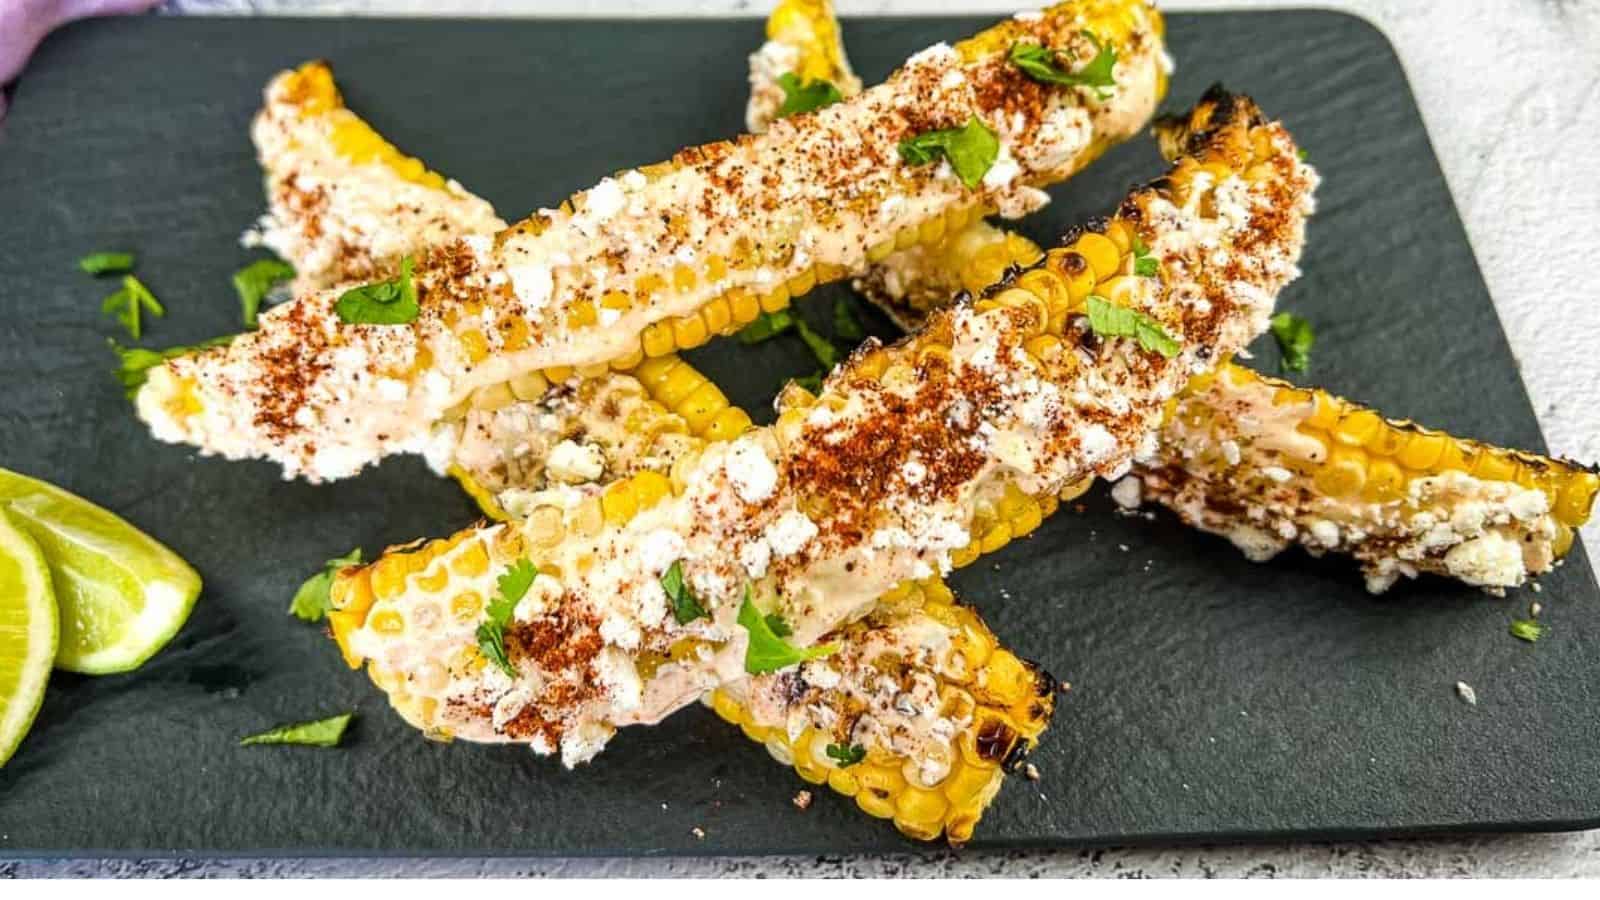 Grilled corn on the cob pieces topped with cheese, chili powder, and cilantro, served on a black slate plate with lime wedges on the side.